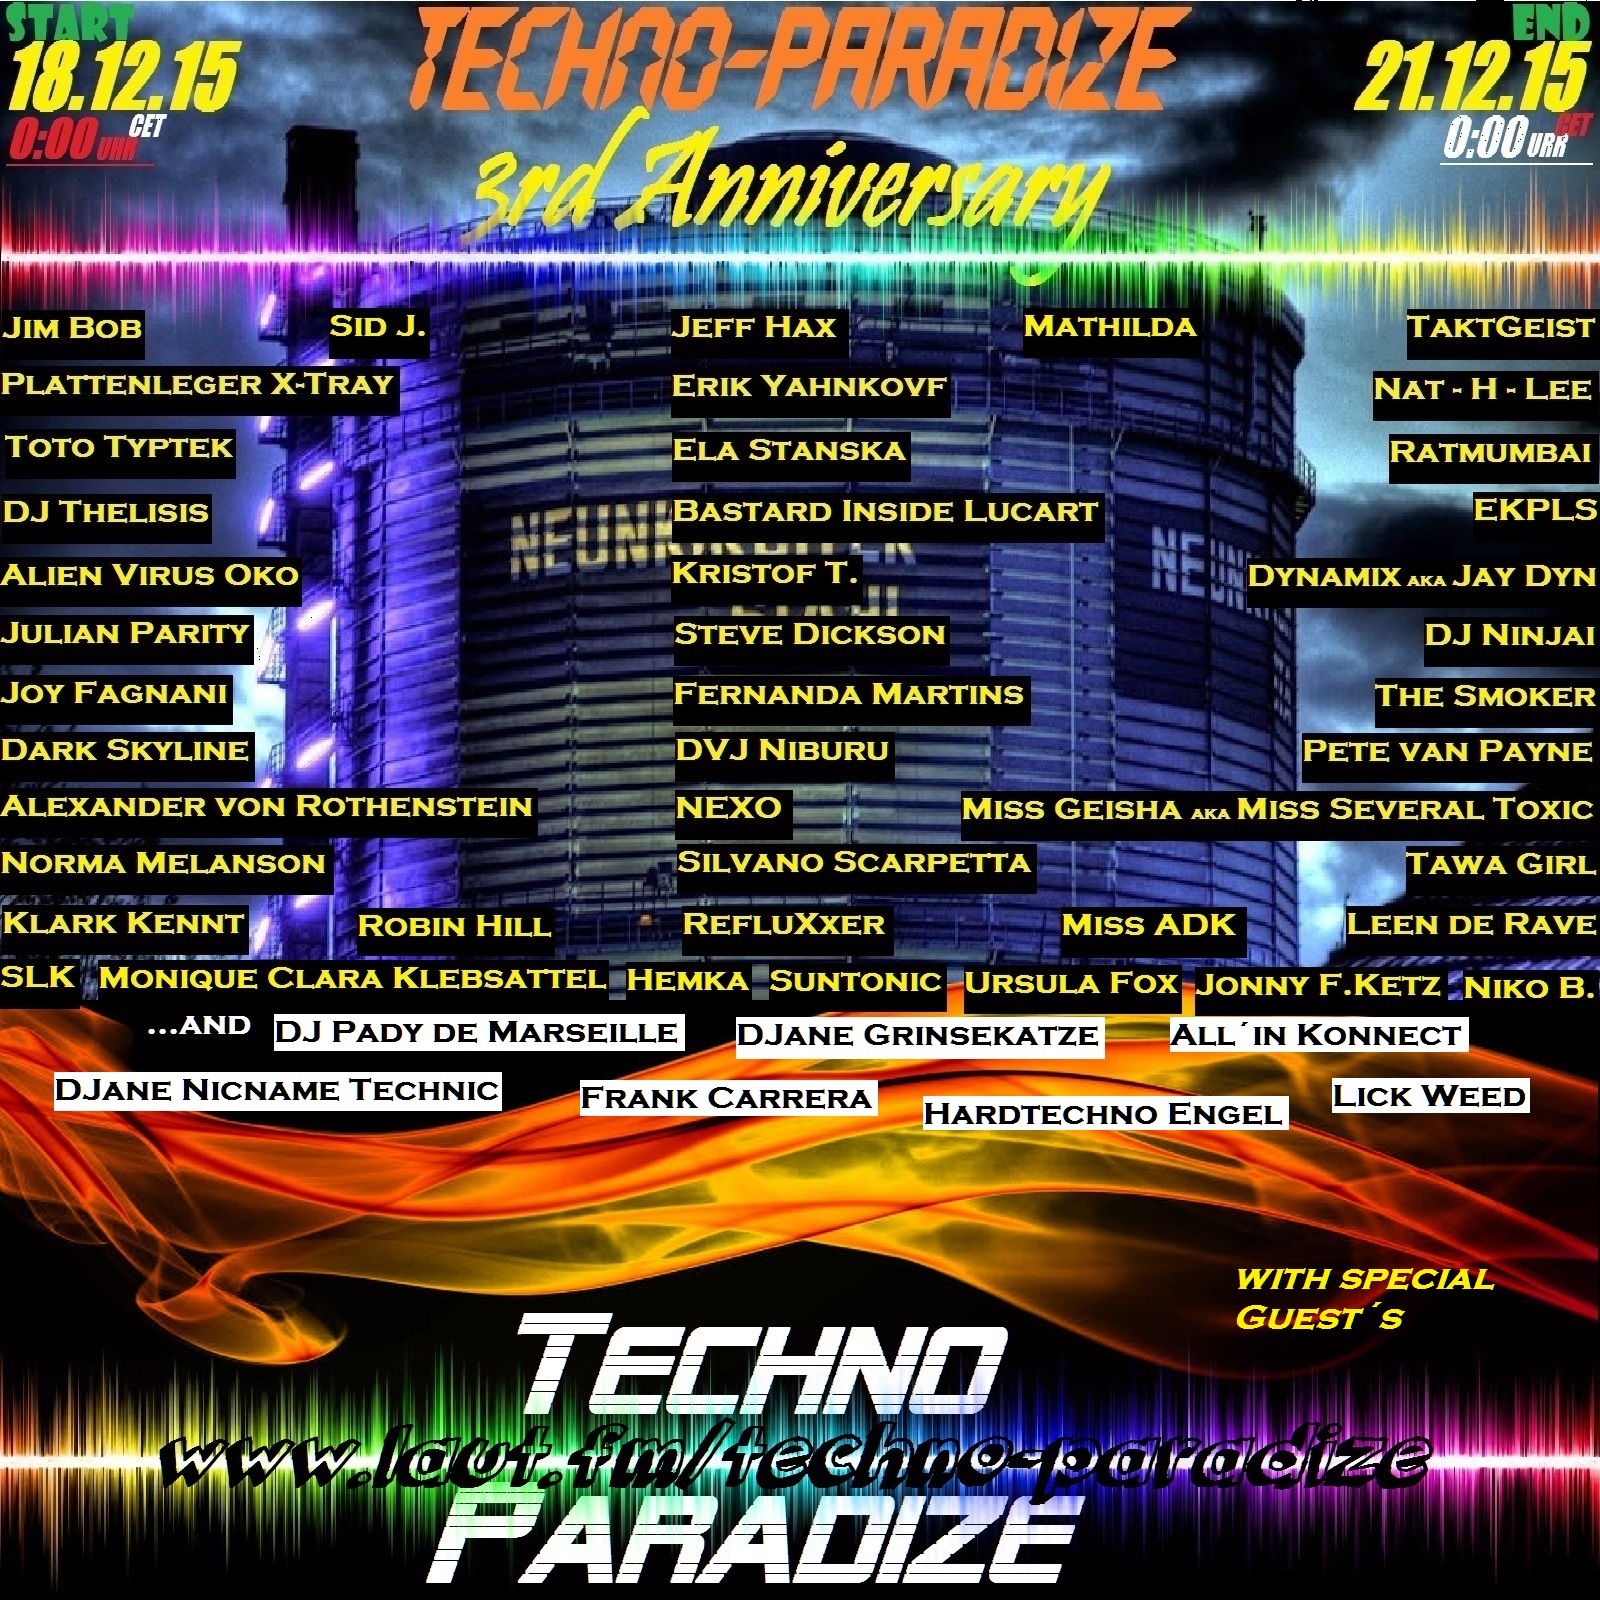 The 3rd Anniversary of Techno-Paradize 2015